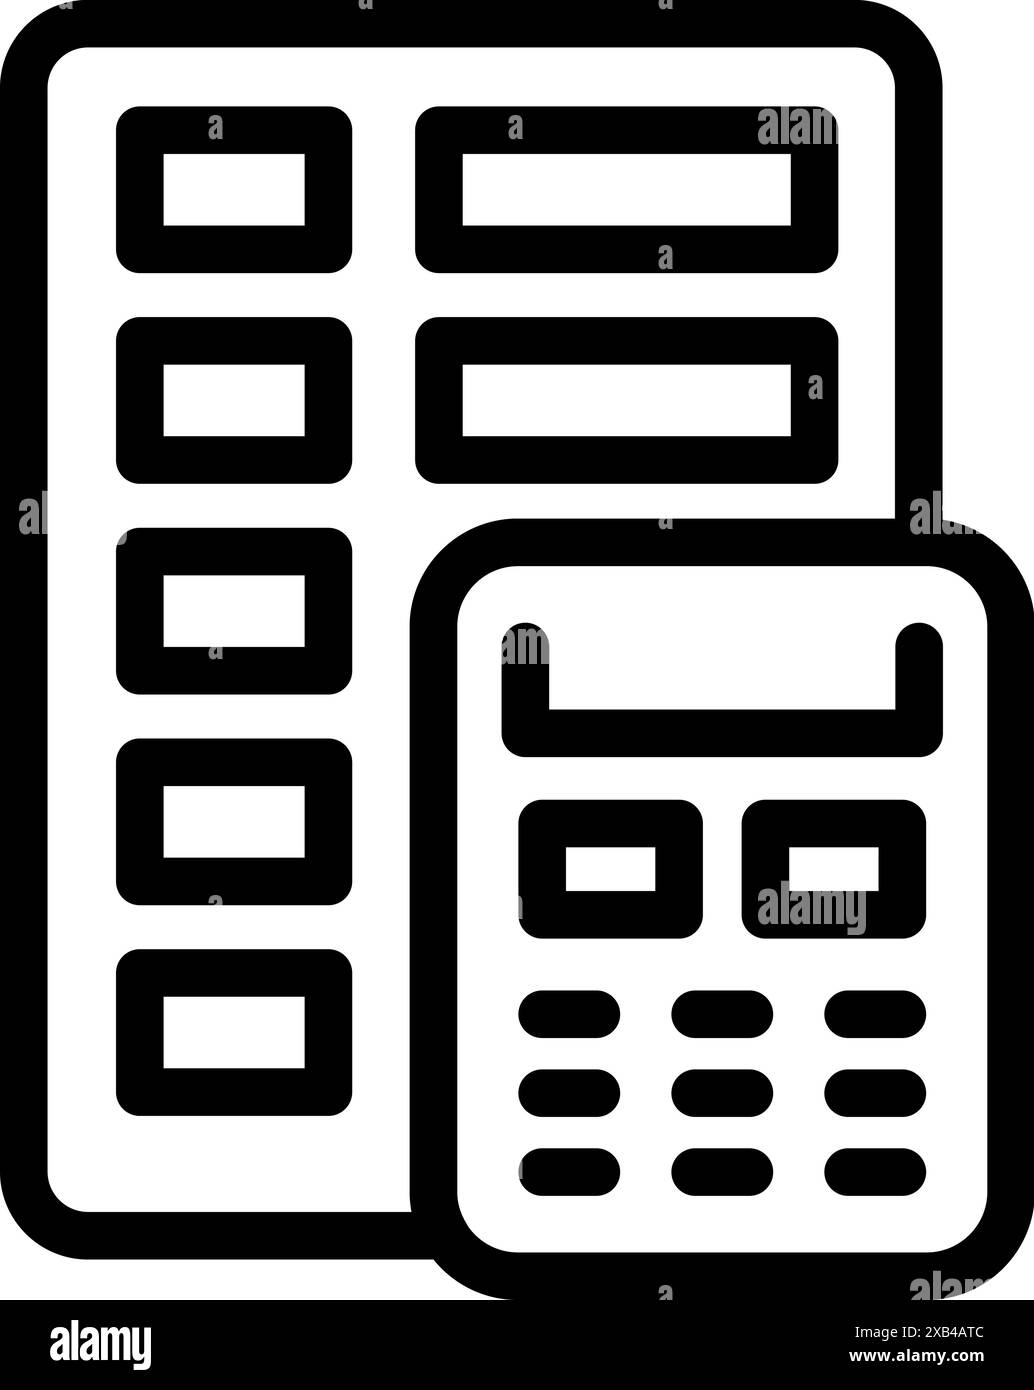 Stylized icon of an accountant calculating corporate taxes using calculator with spreadsheet software Stock Vector